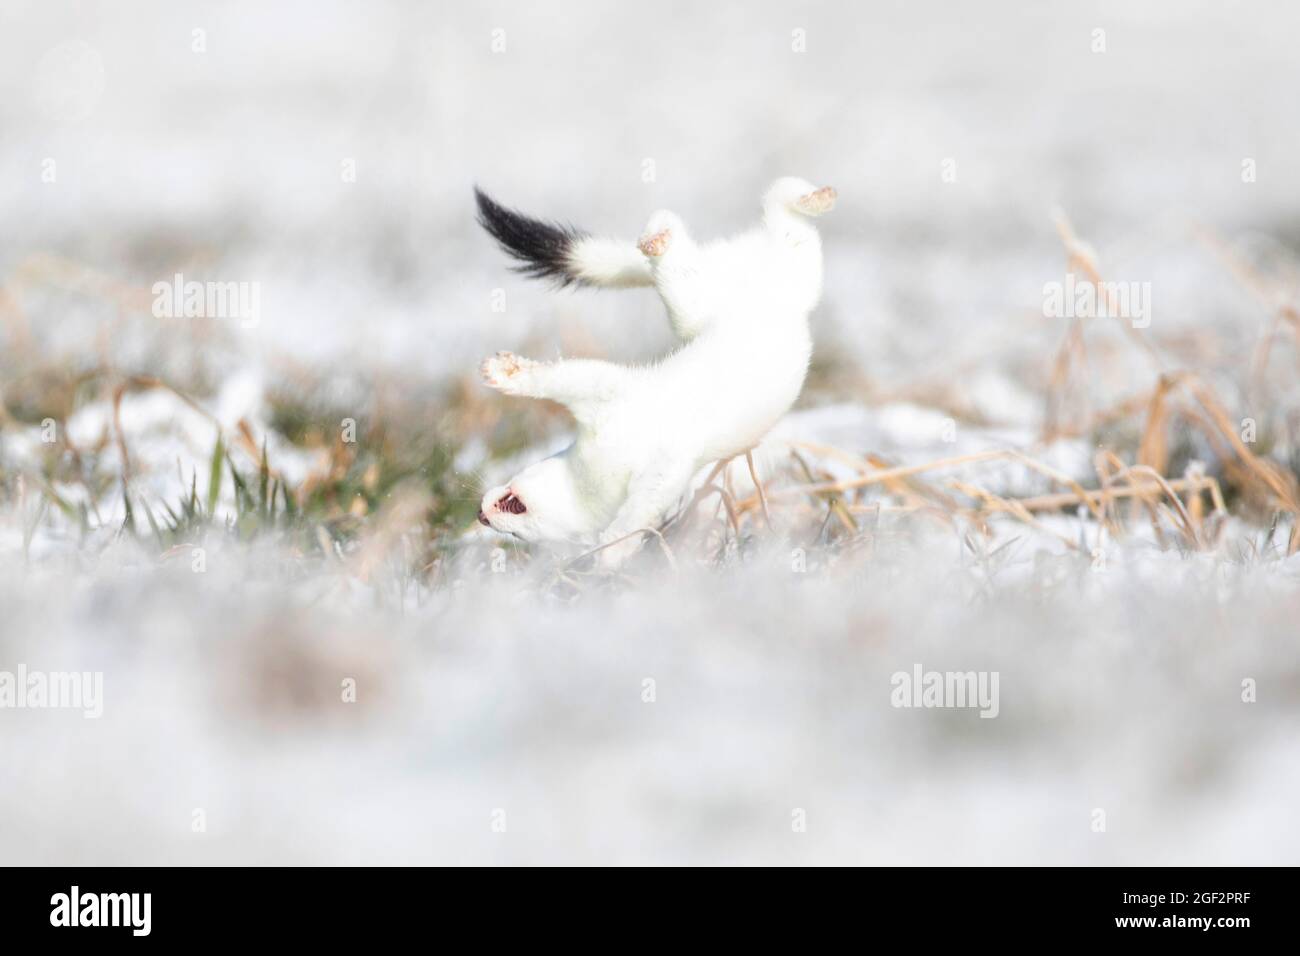 Ermine, Stoat, Short-tailed weasel (Mustela erminea), romping, hunting technique, Germany, Bavaria Stock Photo